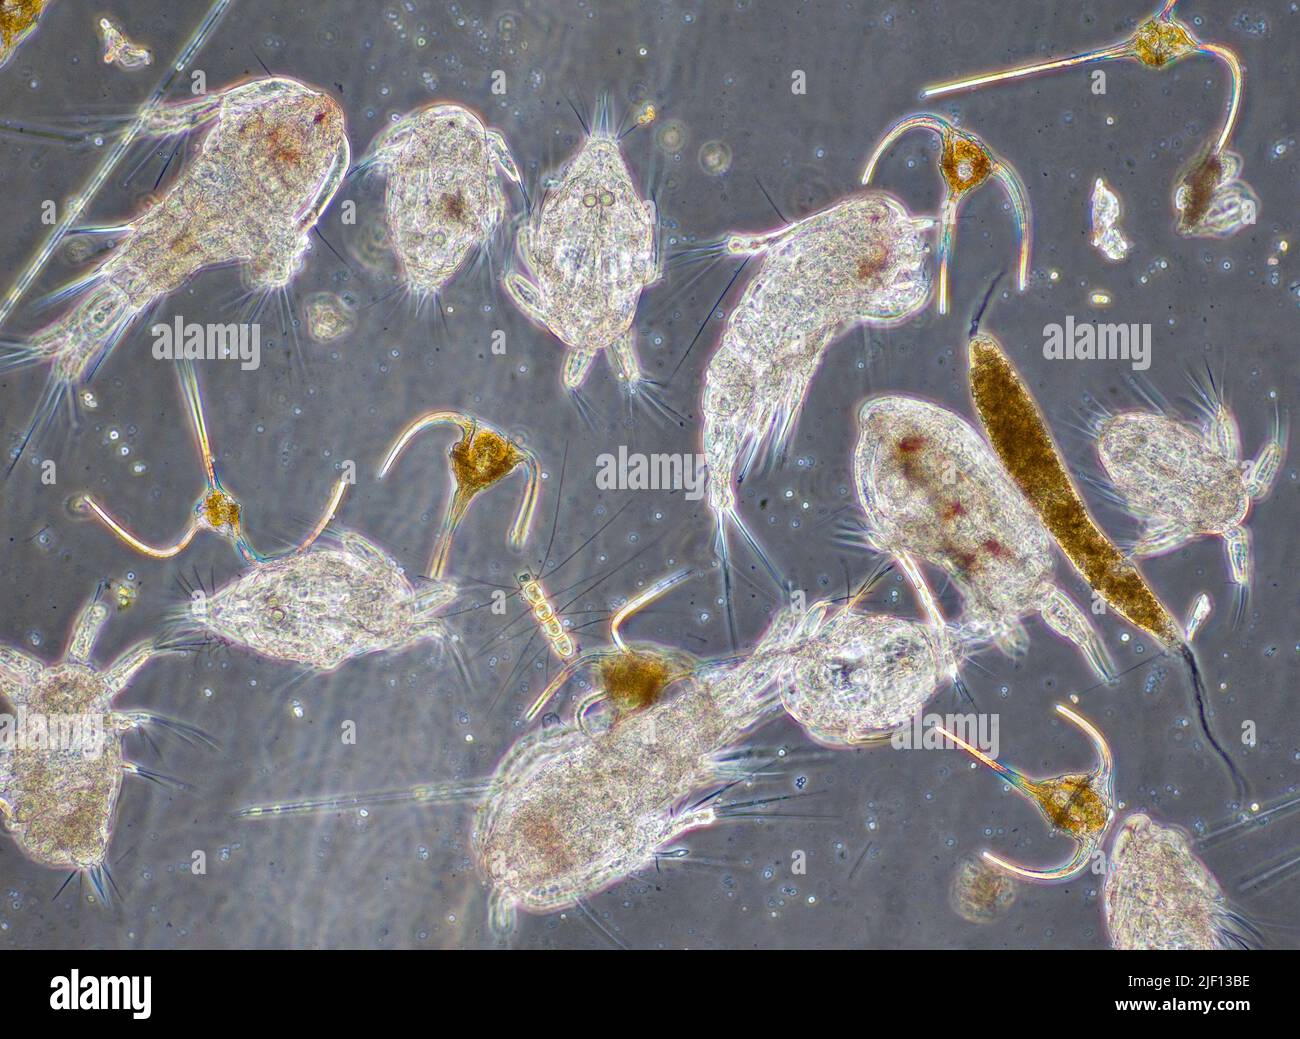 Diverse marine plancton sample from south-western Norway in August. Stock Photo